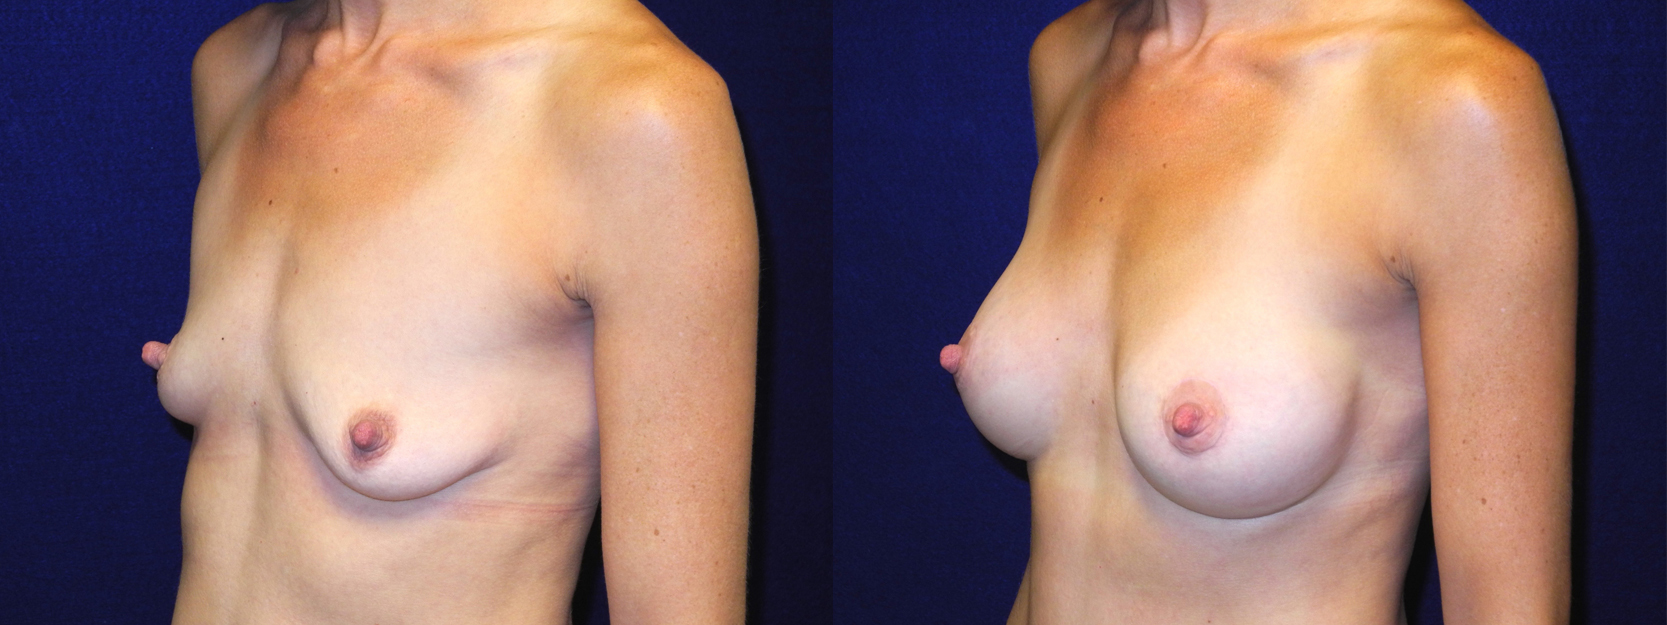 Left 3/4 View - Breast Augmentation with Lift